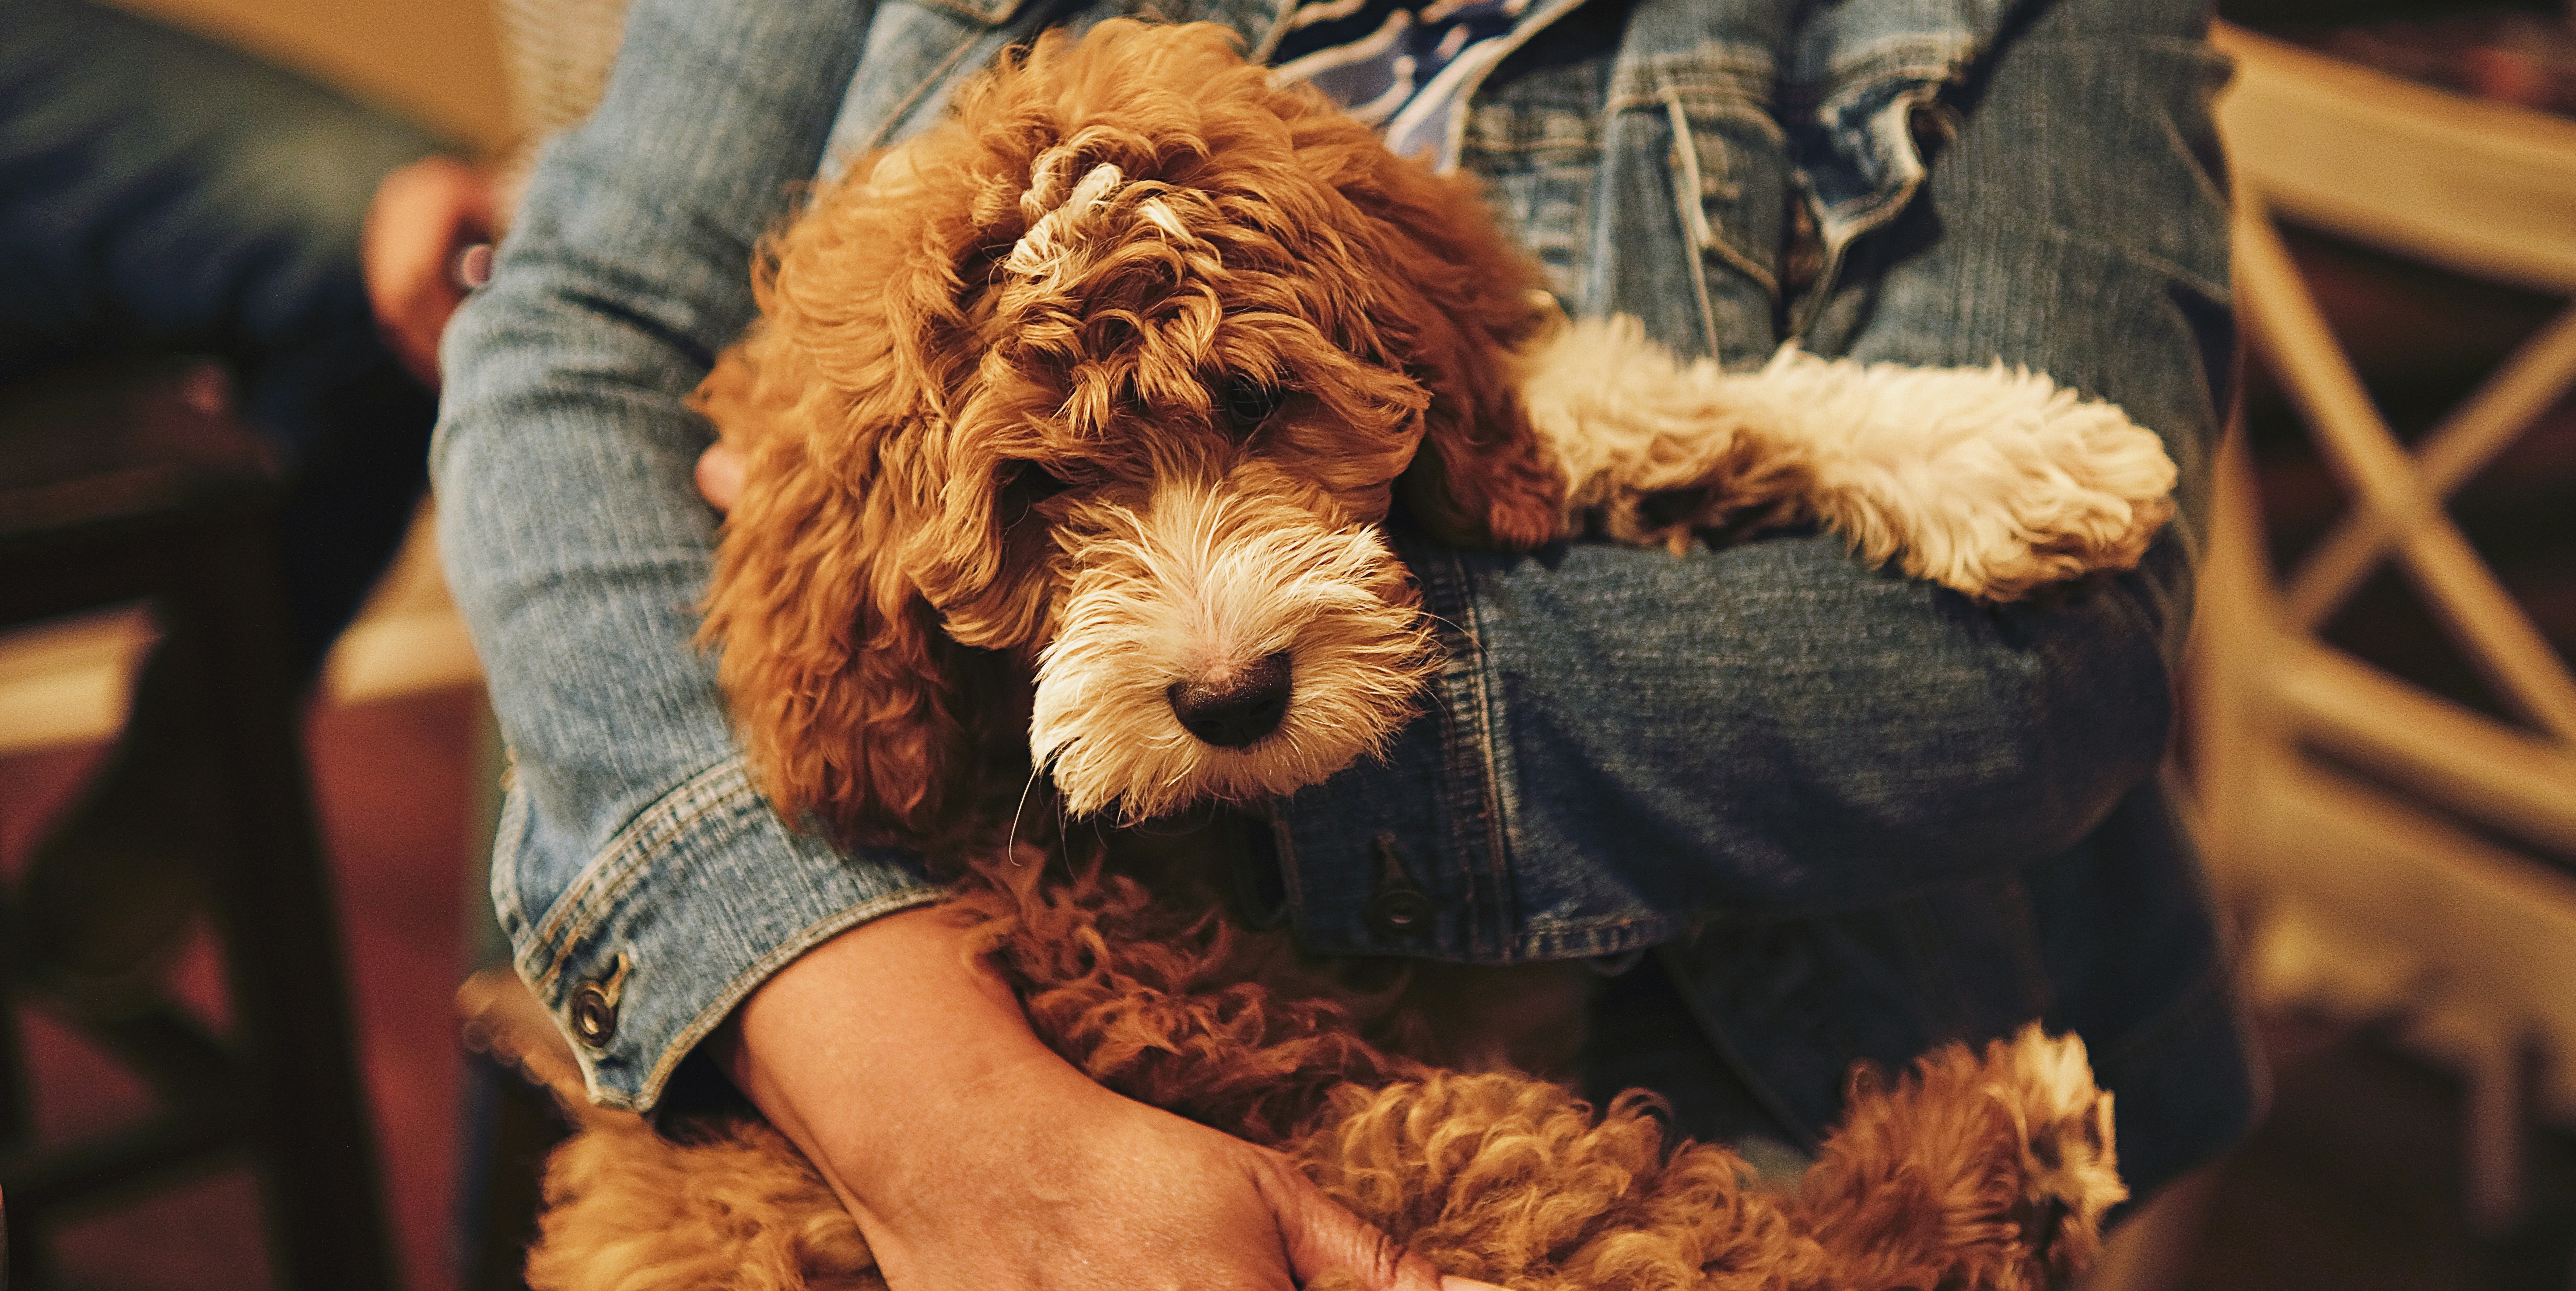 A brown and white goldendoodle being held in a person's arms.